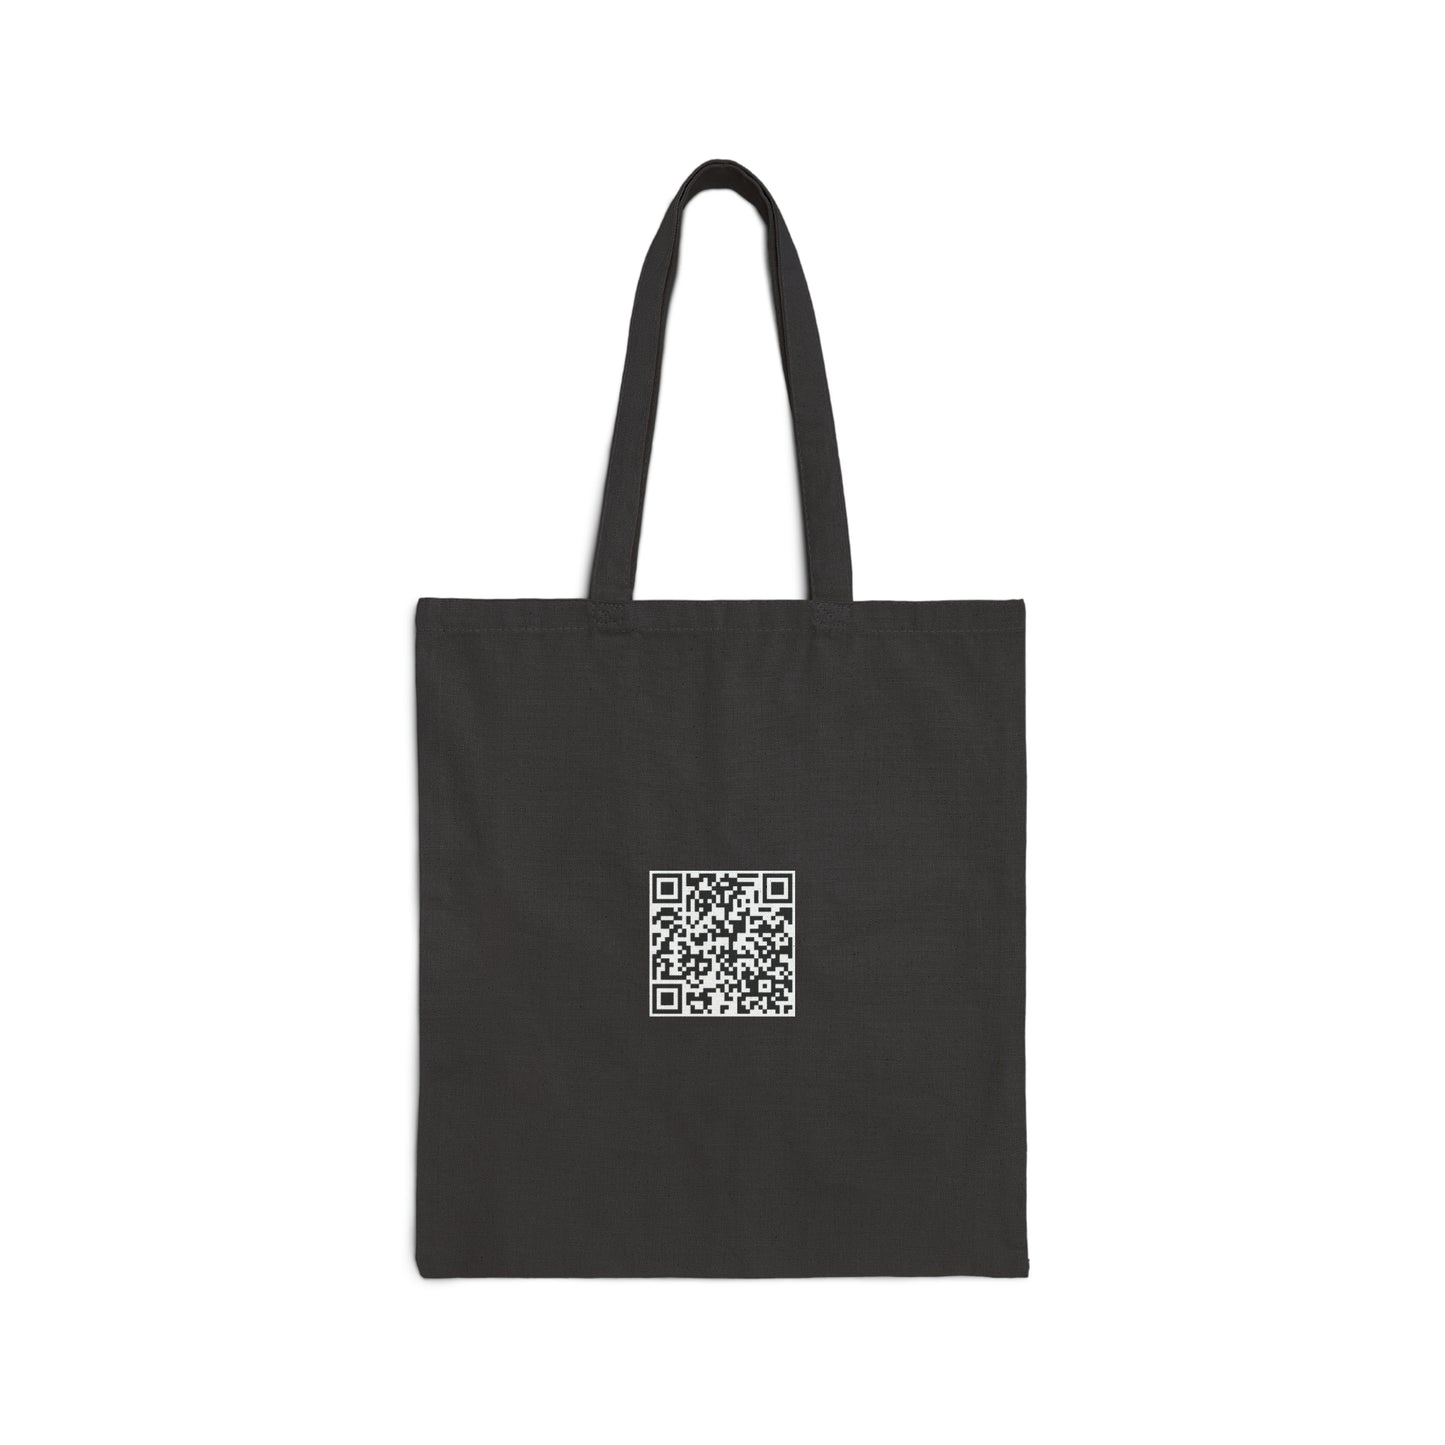 Athena - Of The Abandoned - Cotton Canvas Tote Bag